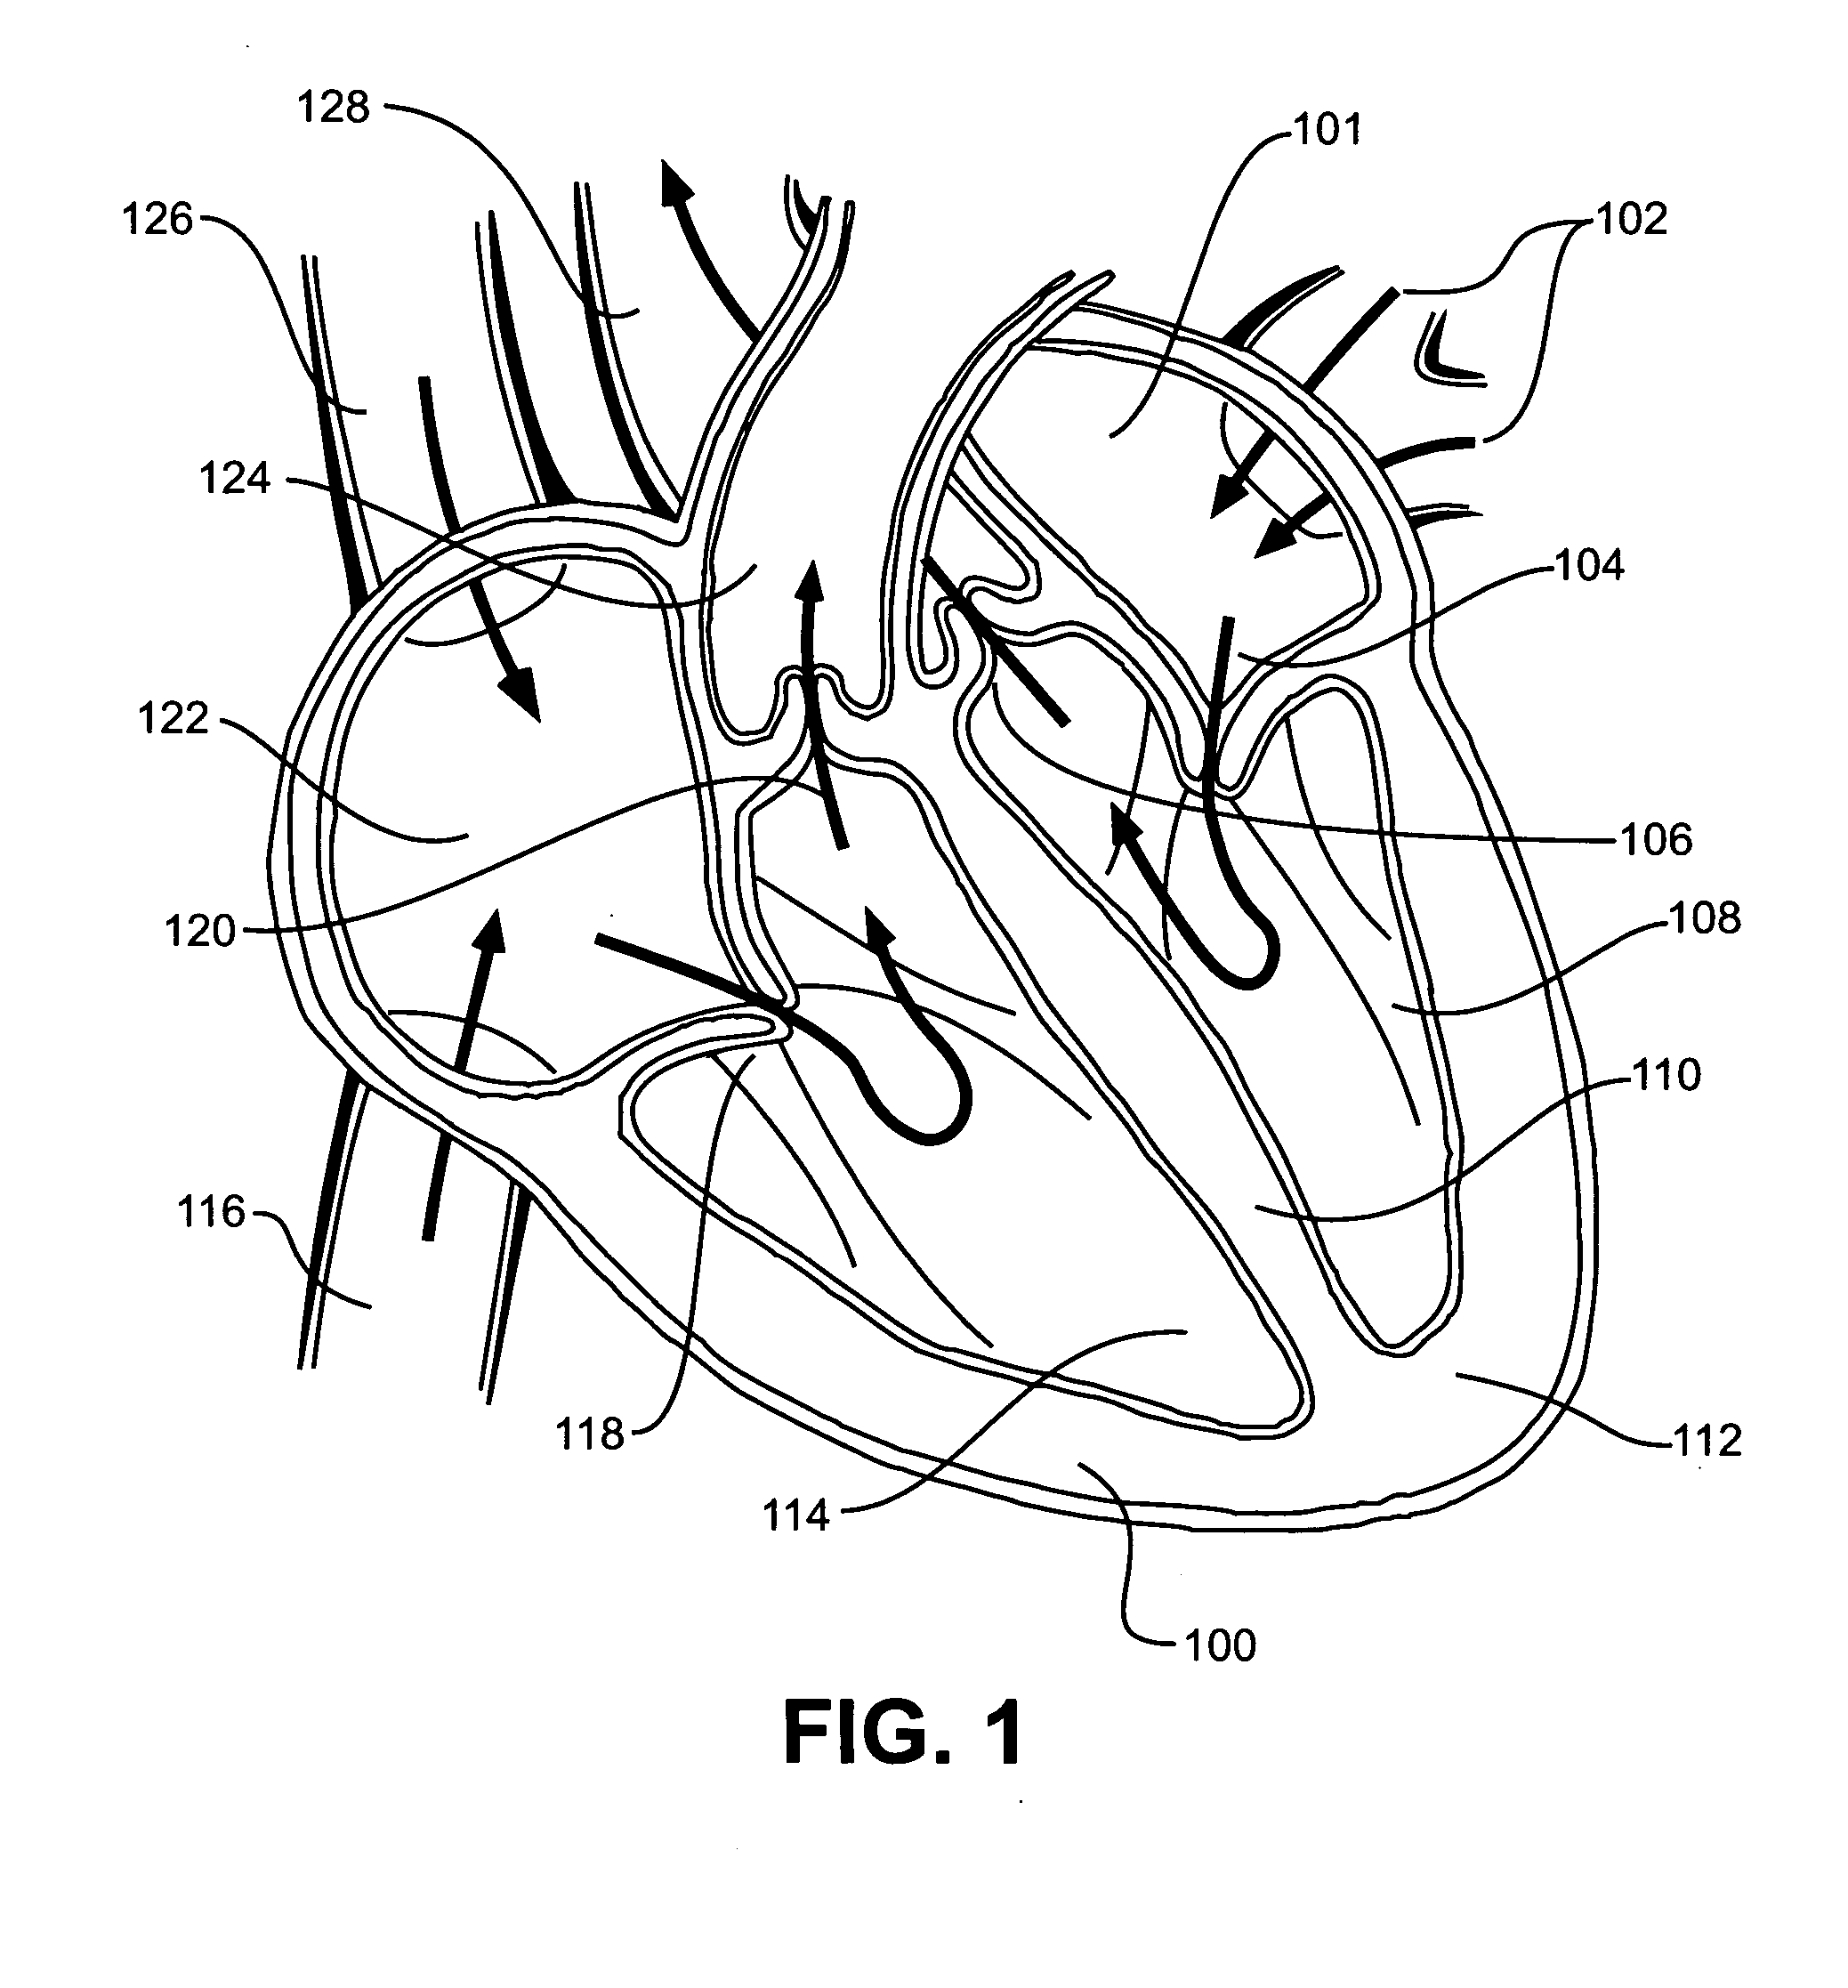 Infusion treatment agents, catheters, filter devices, and occlusion devices, and use thereof